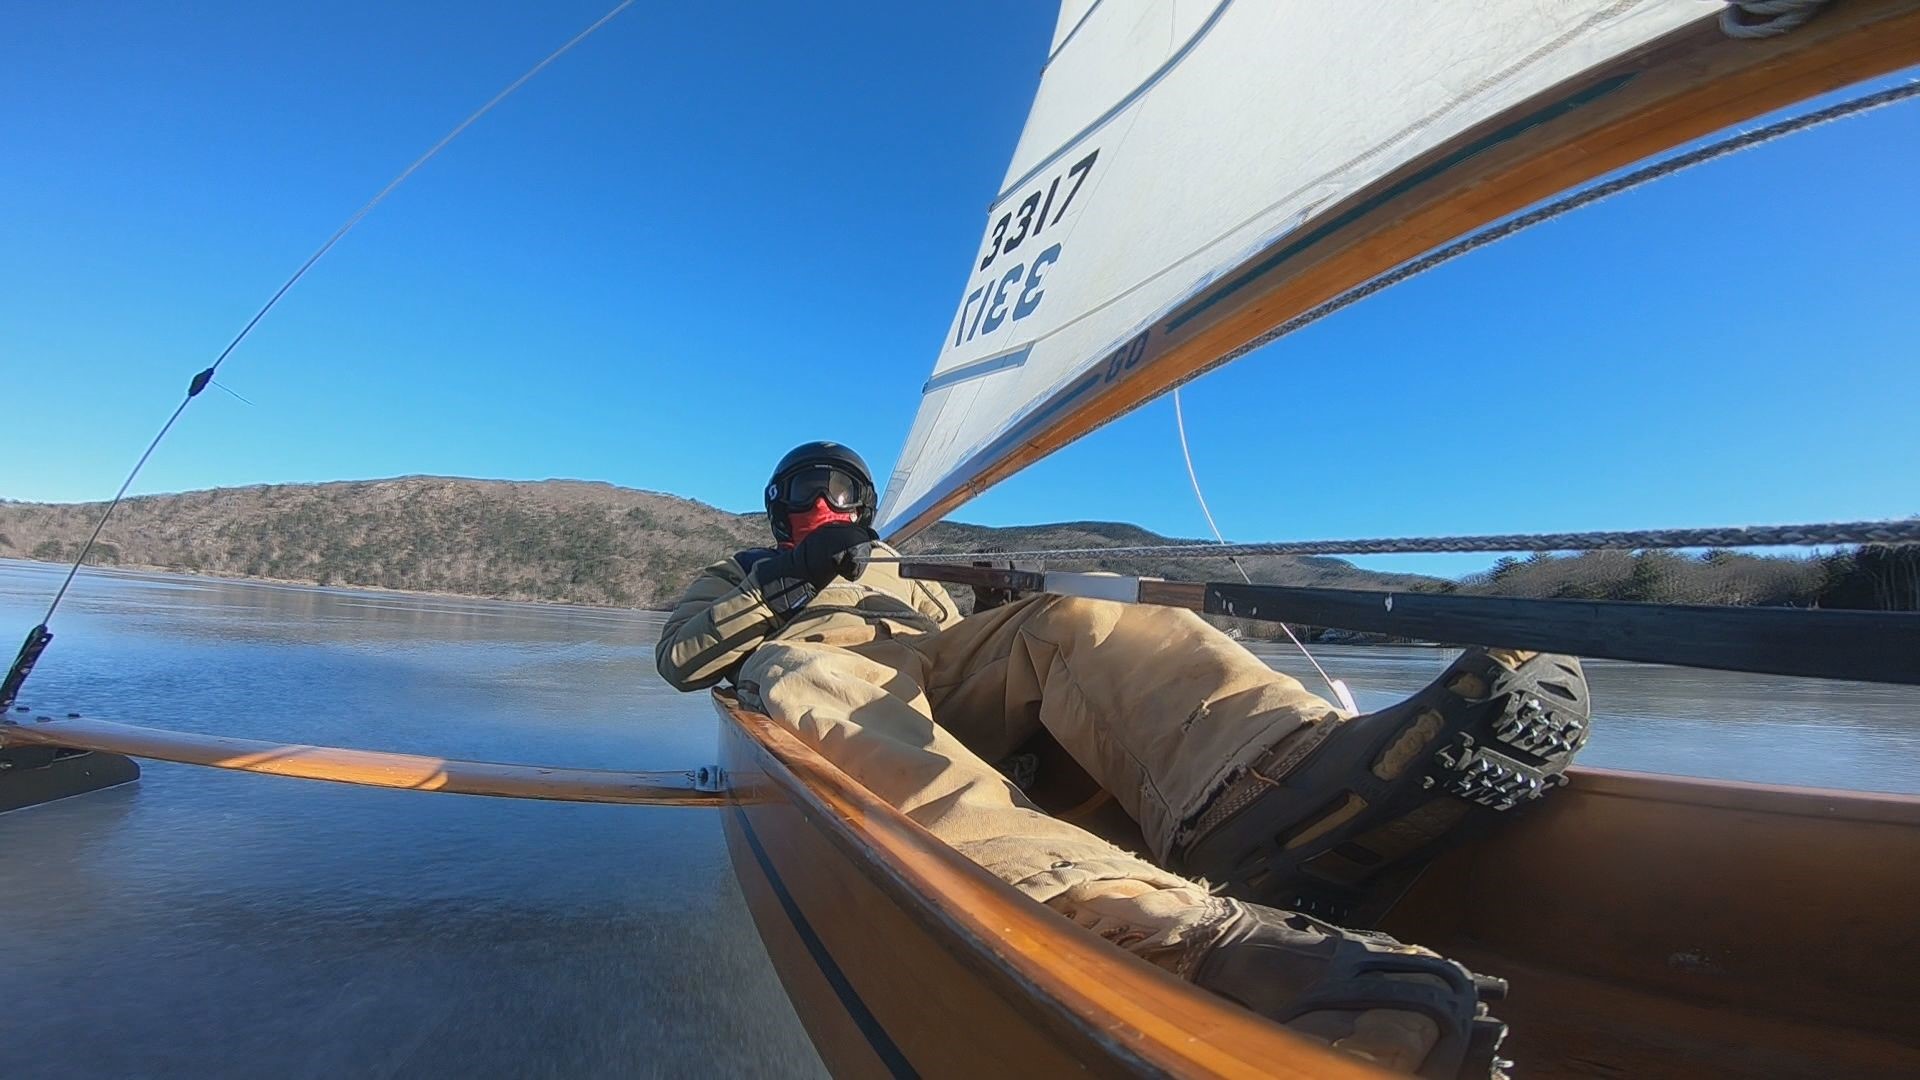 Sailing on the hard water in Maine